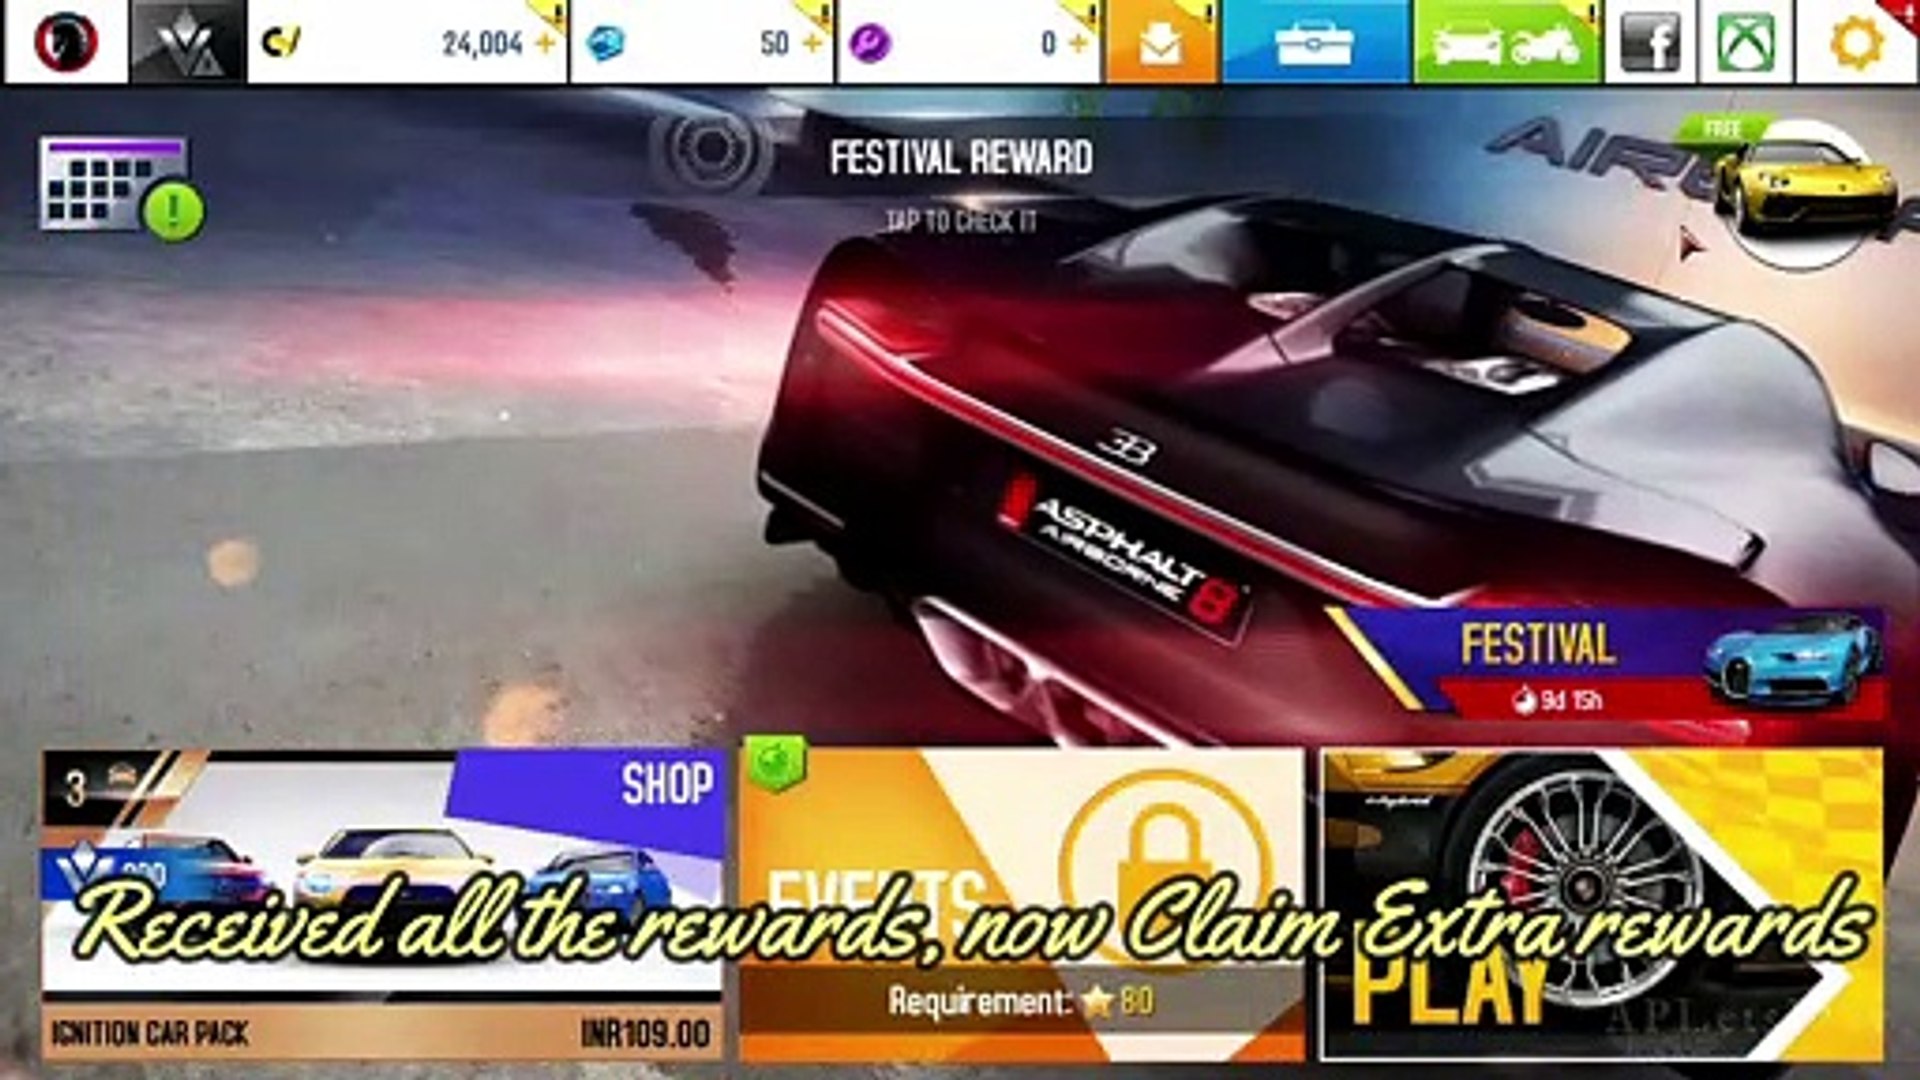 Rewarded Free Cars By Ads & Festival Quests Event 2020 - Asphalt 8 Airborne  | Apletsplay - Video Dailymotion